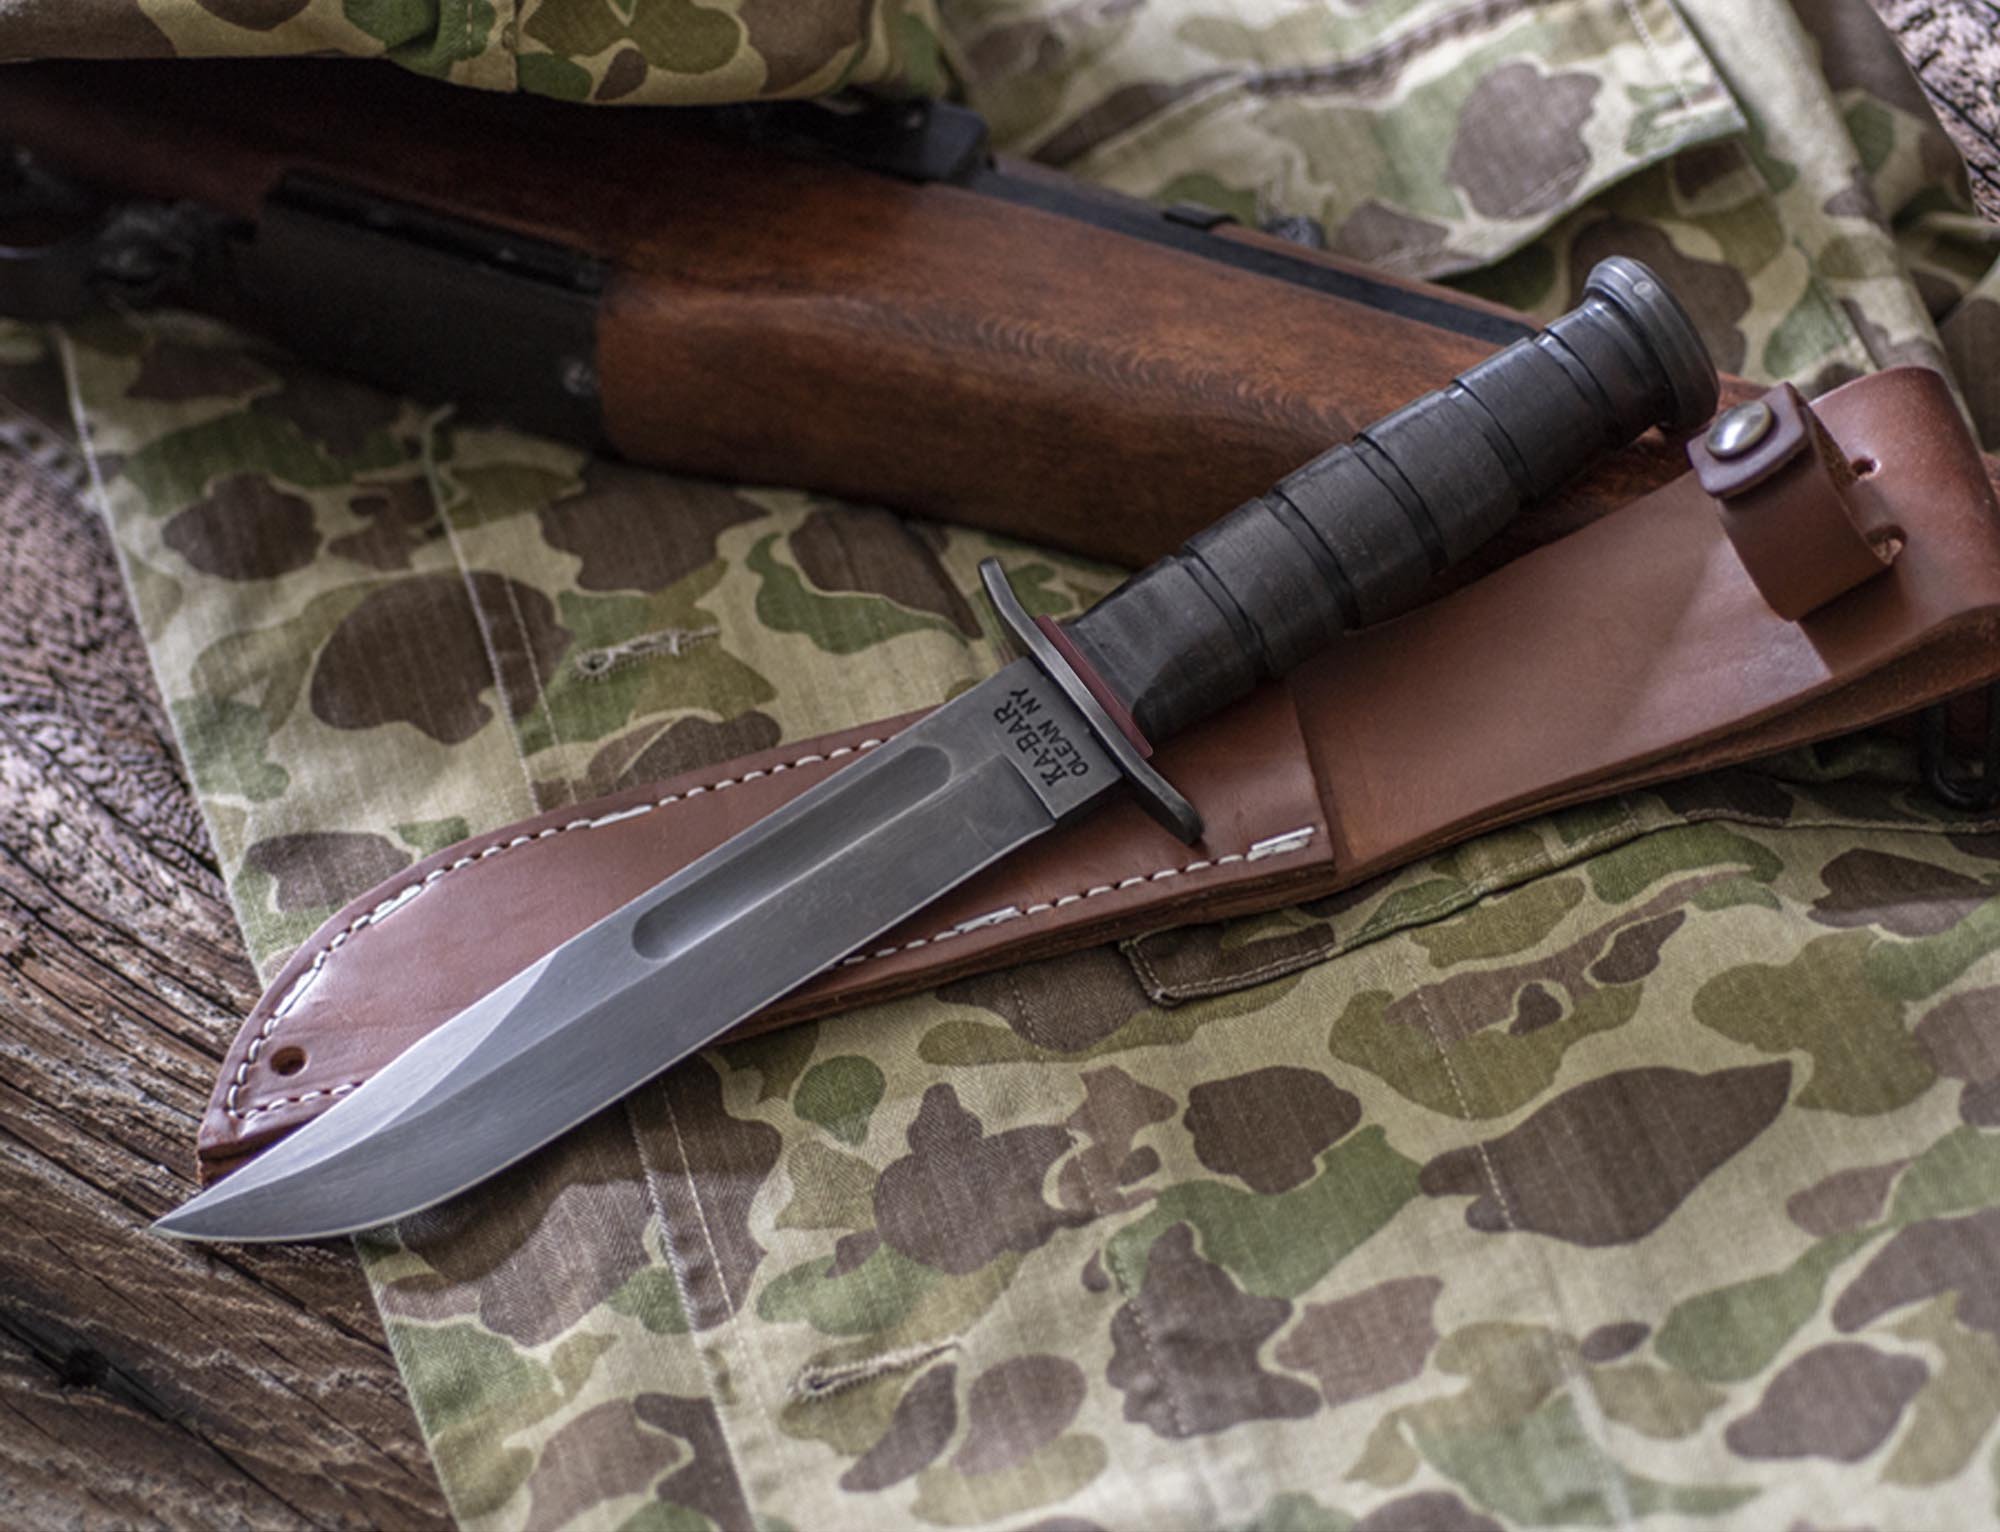 State & Union Red Spacer KA-BAR Knife Outdoors